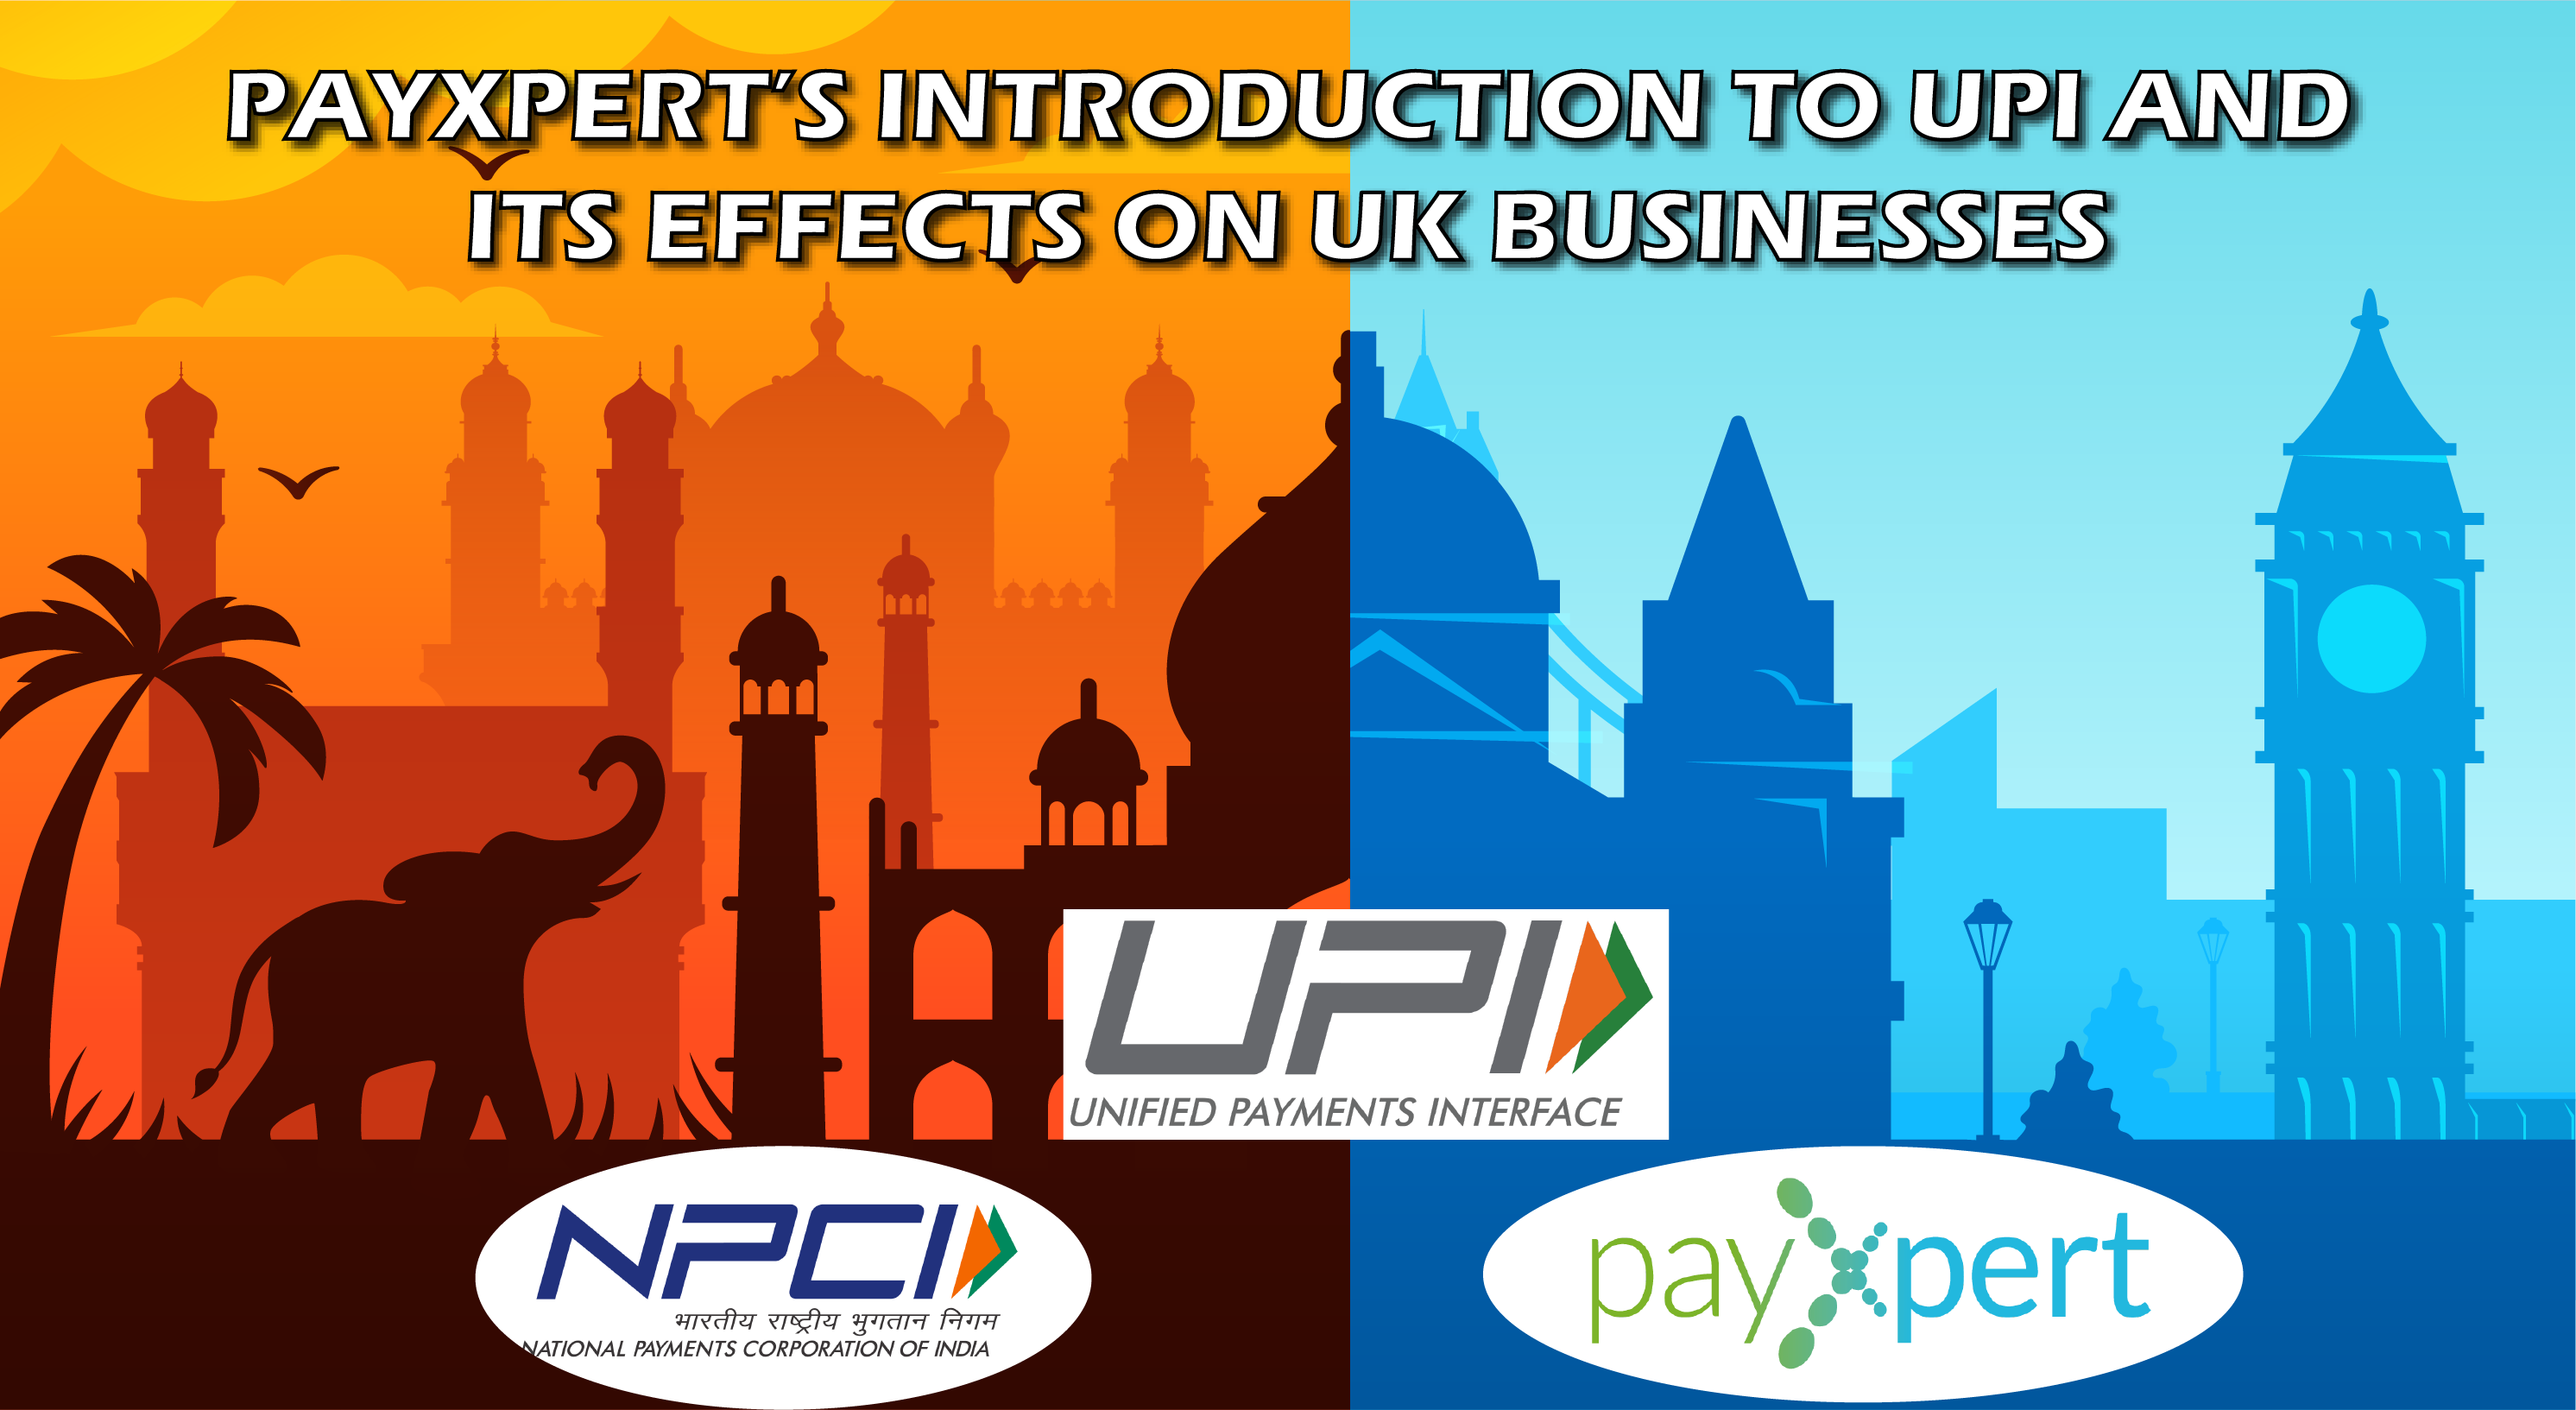 PayXpert’s introduction to UPI and its Effects on UK Businesses